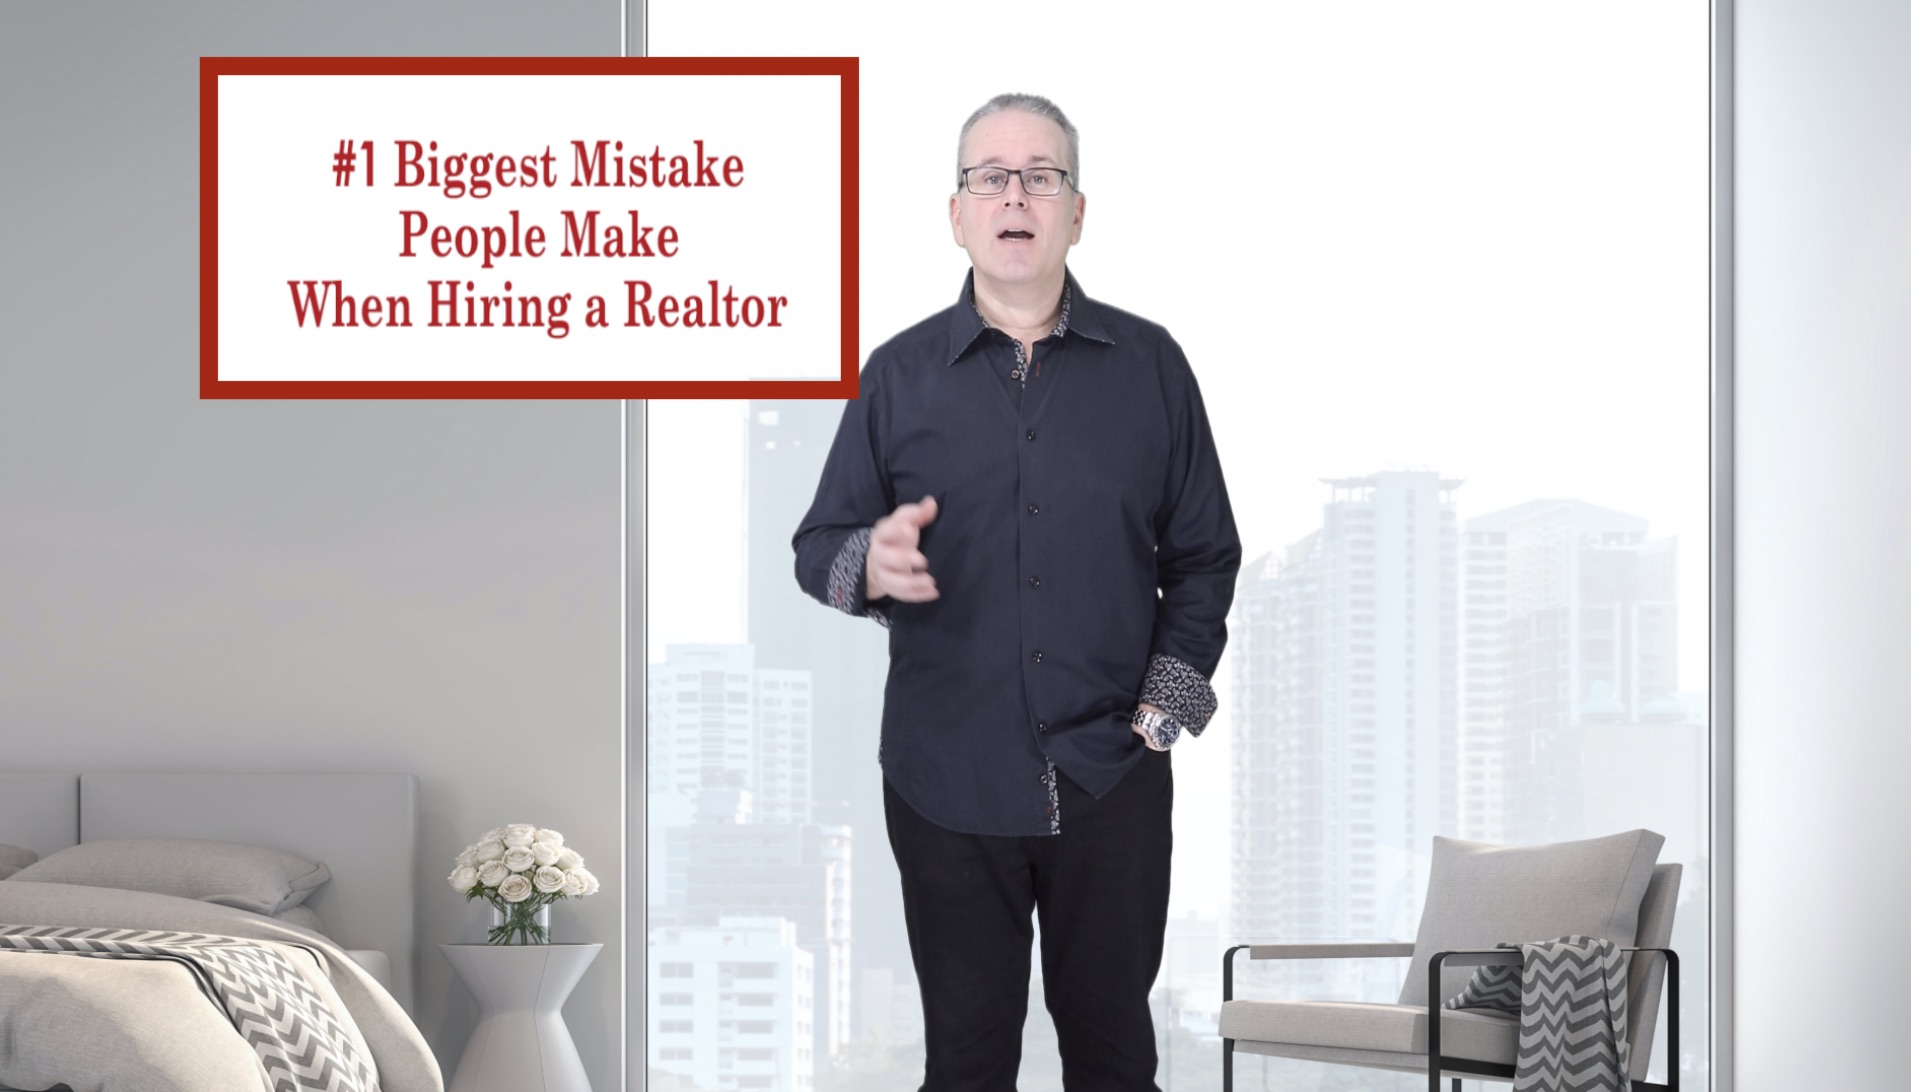 #1 Biggest Mistake People Make When Hiring a Realtor.